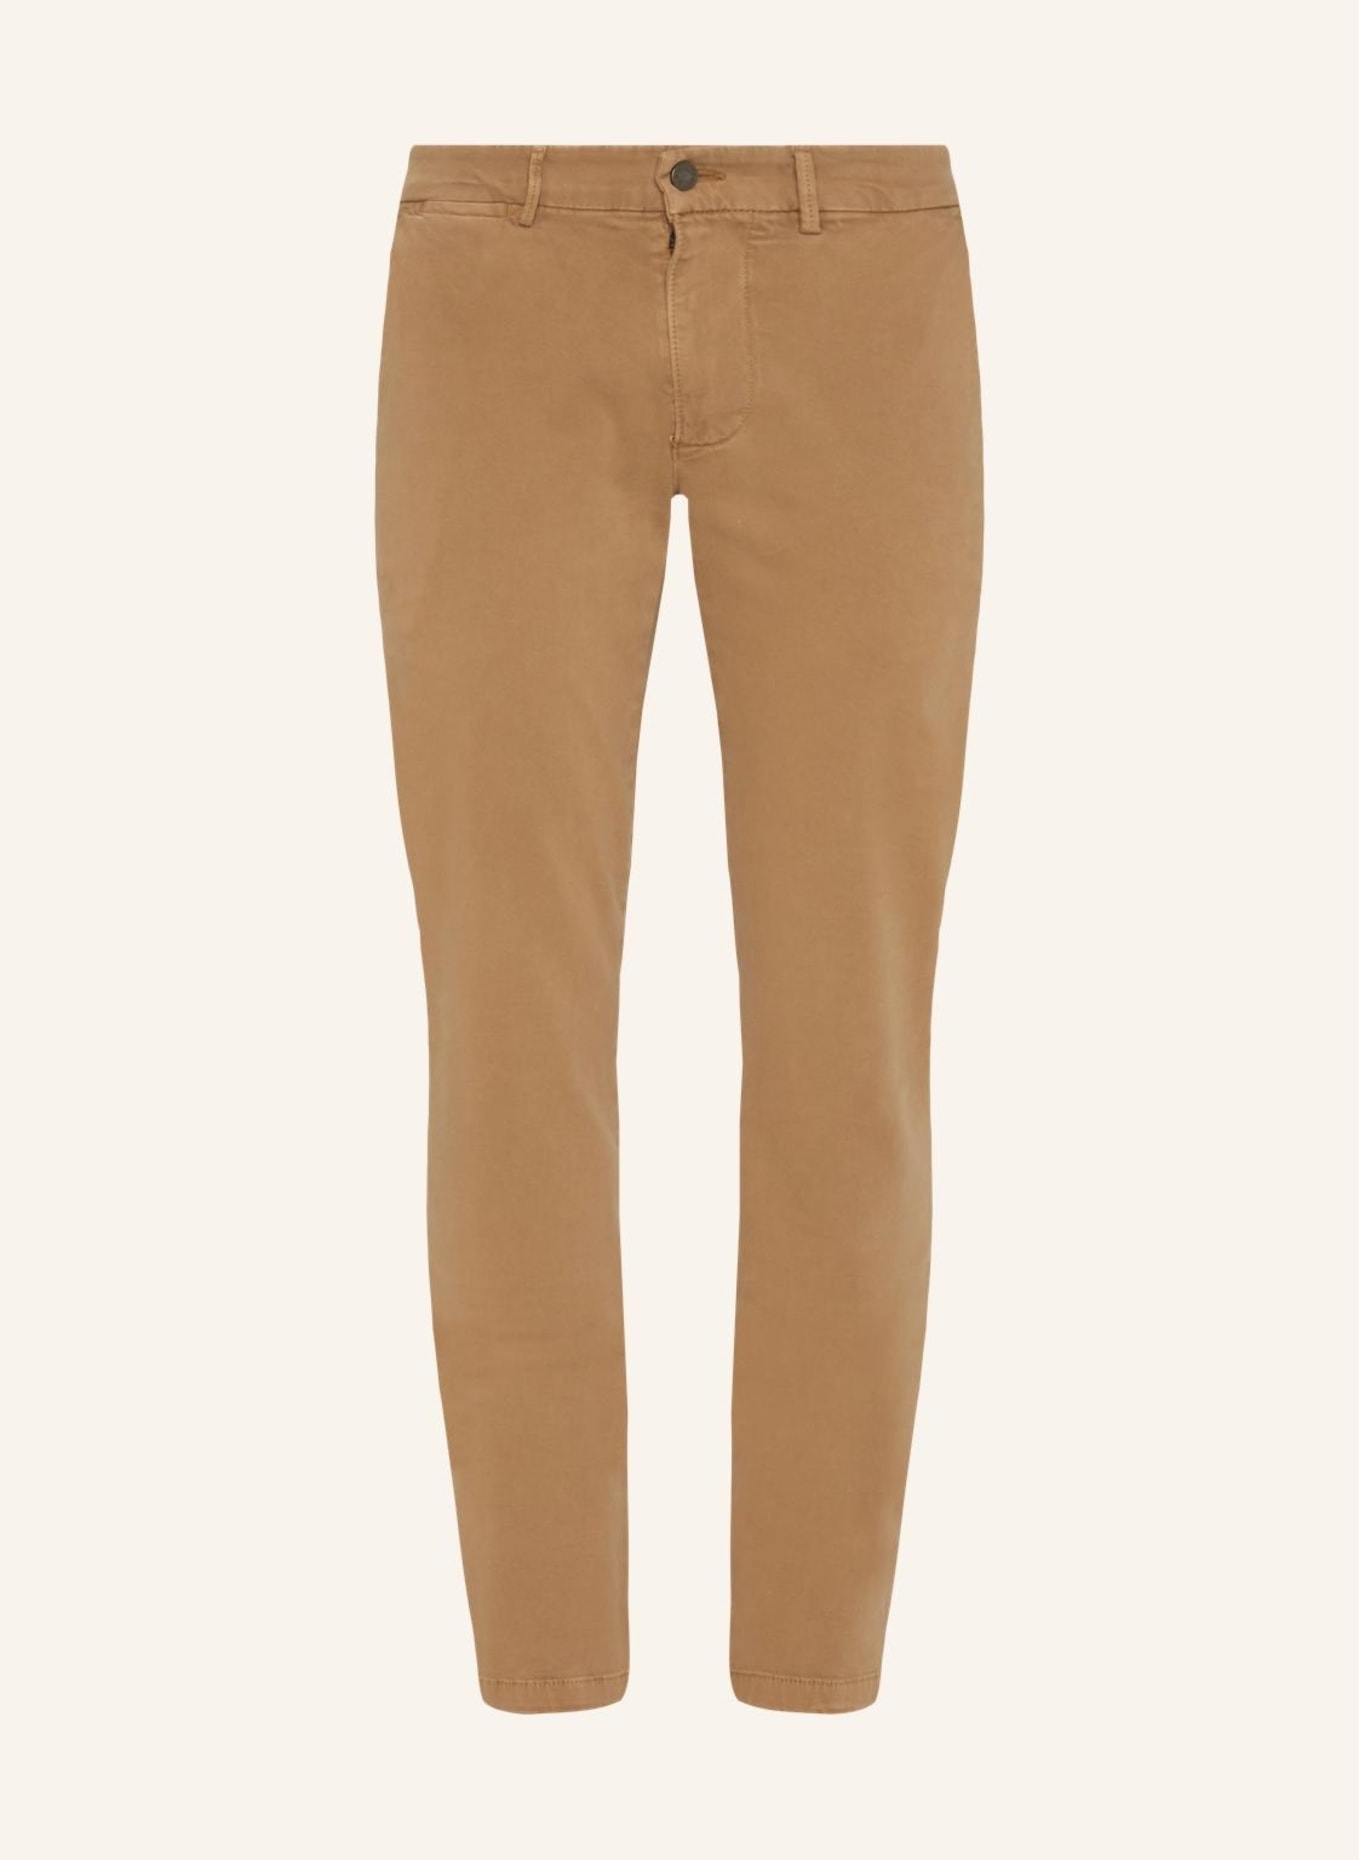 7 for all mankind SLIMMY CHINO Pant, Farbe: BEIGE (Bild 1)